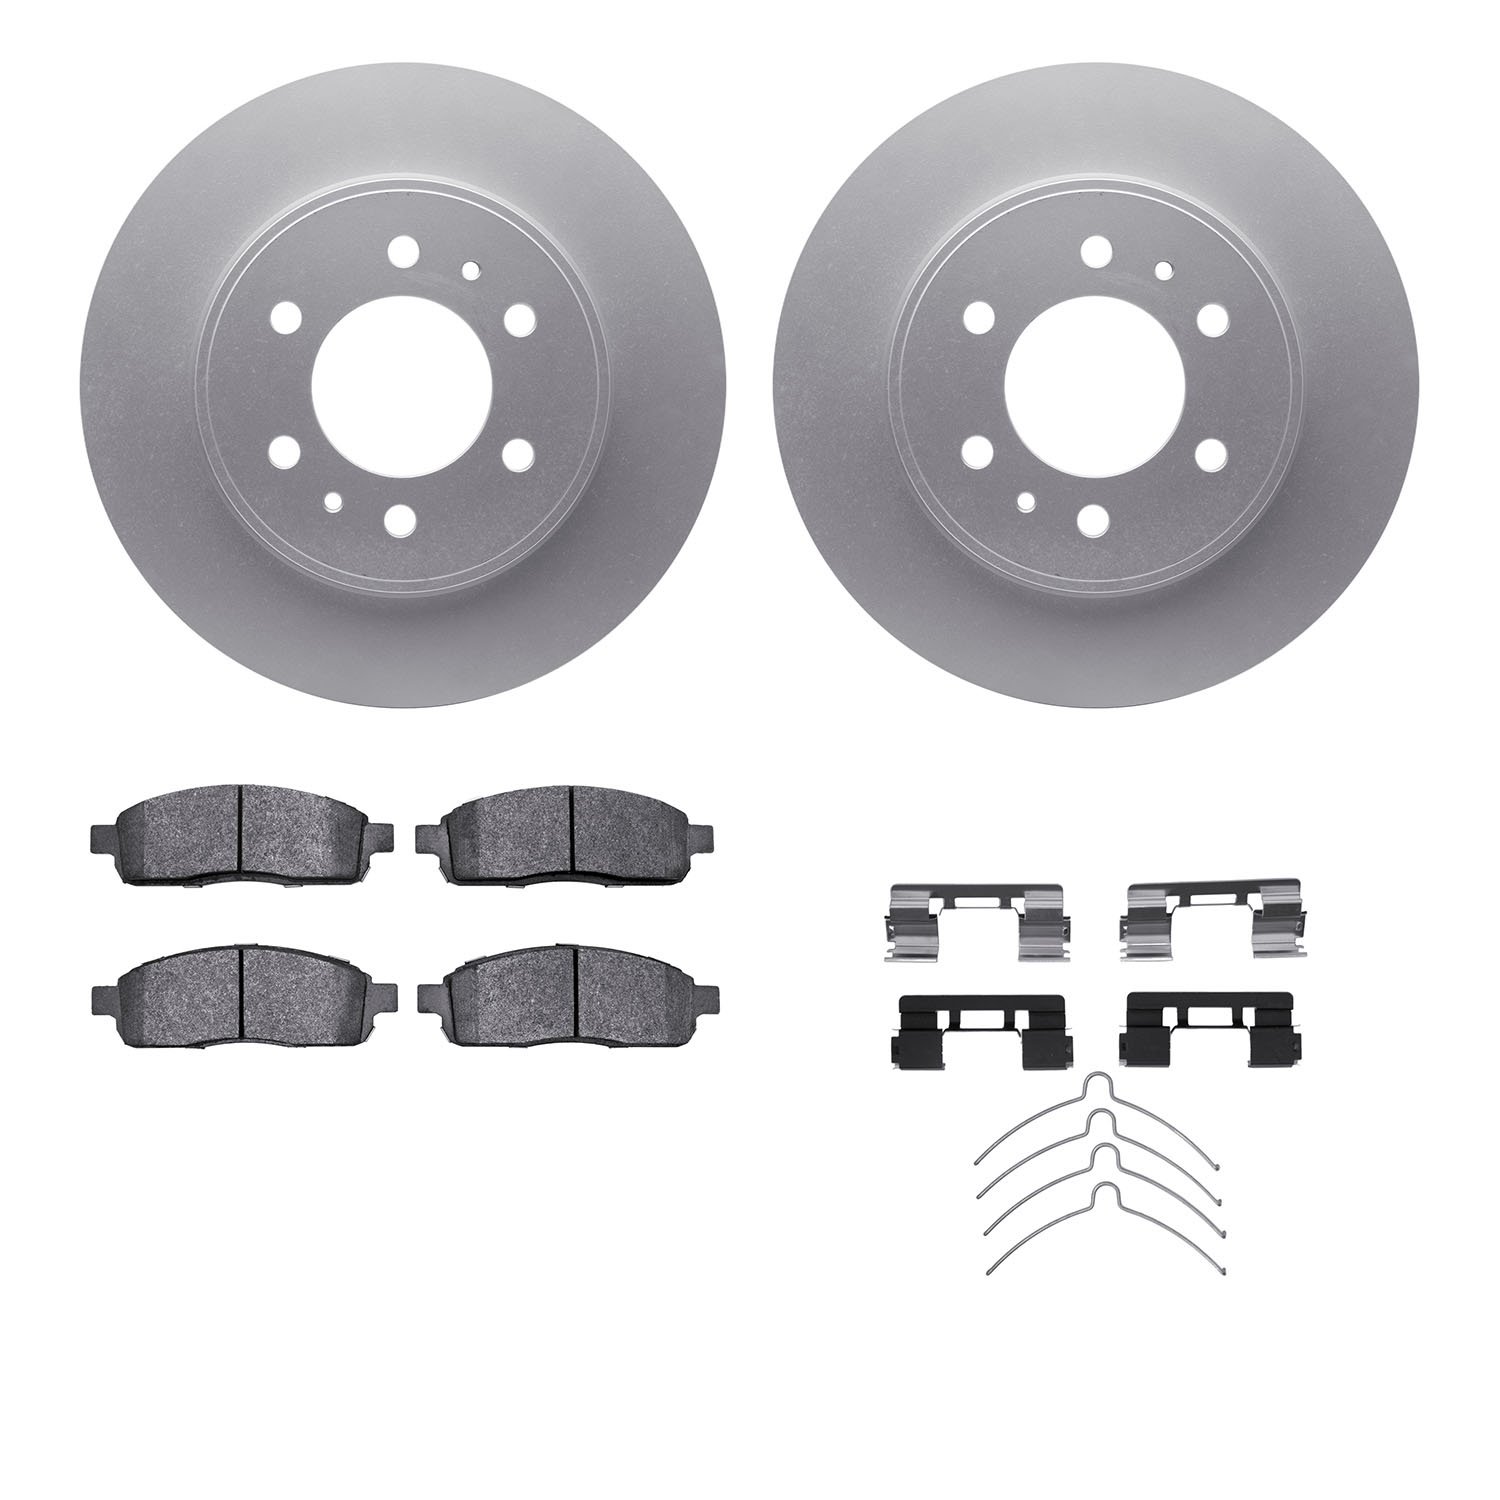 4412-54067 Geospec Brake Rotors with Ultimate-Duty Brake Pads & Hardware, 2009-2009 Ford/Lincoln/Mercury/Mazda, Position: Front